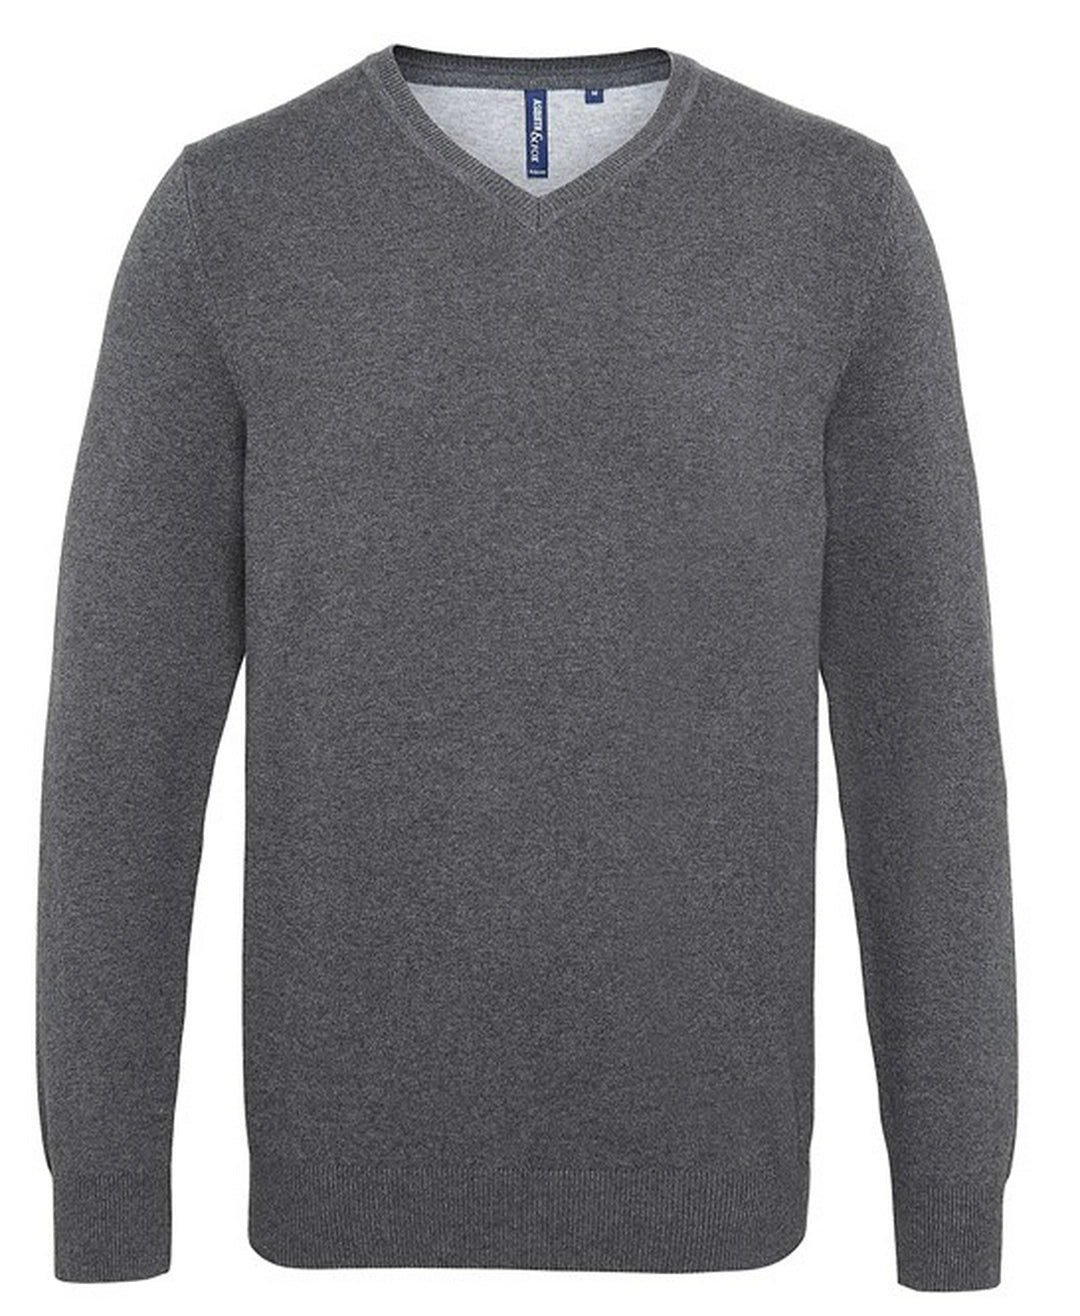 Asquith & Fox AQ042 Mens Cottons Blend V-Neck Sweater - COOZO